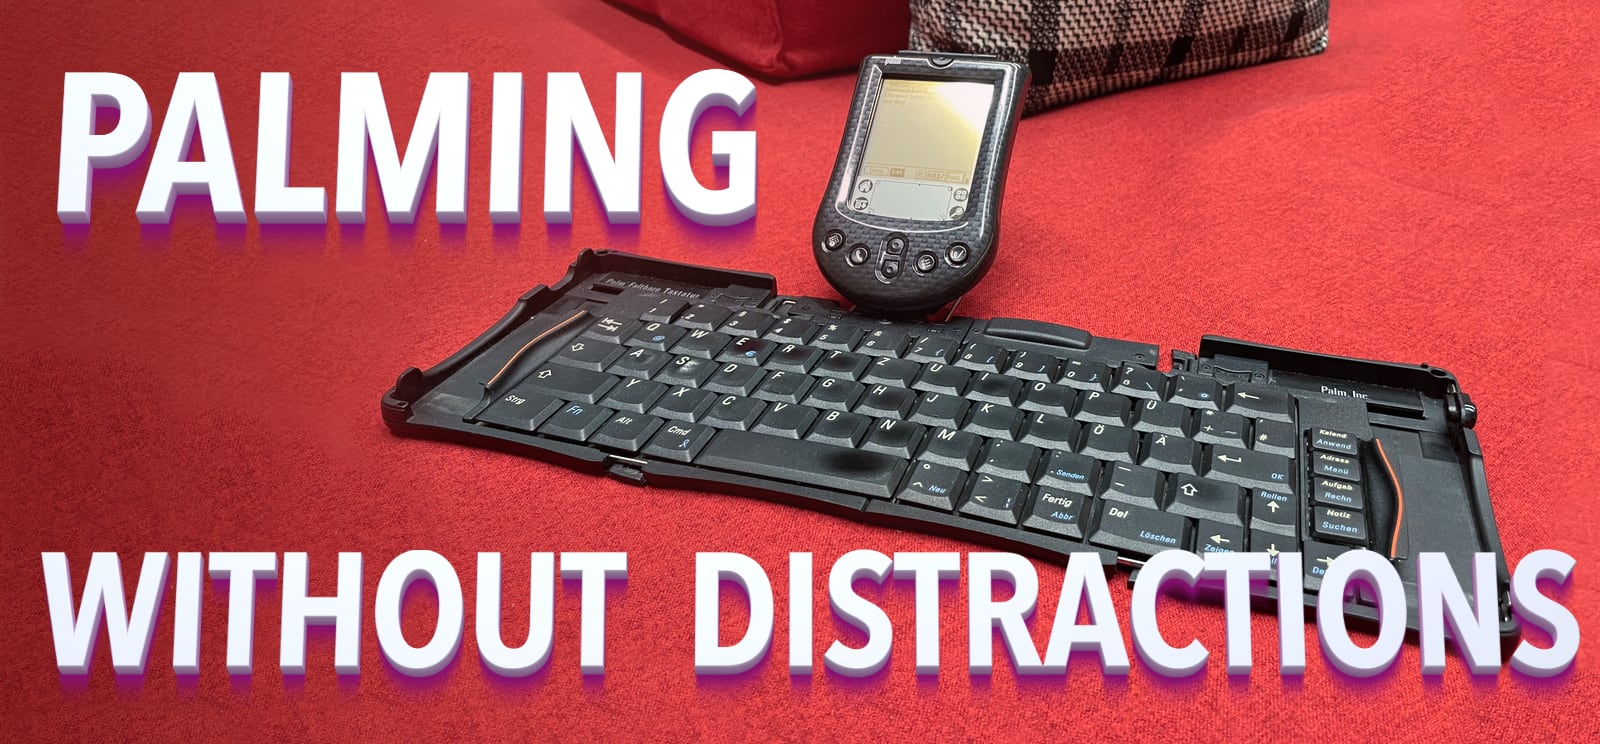 Distraction-free writing with a Palm m125 and a foldable keyboard